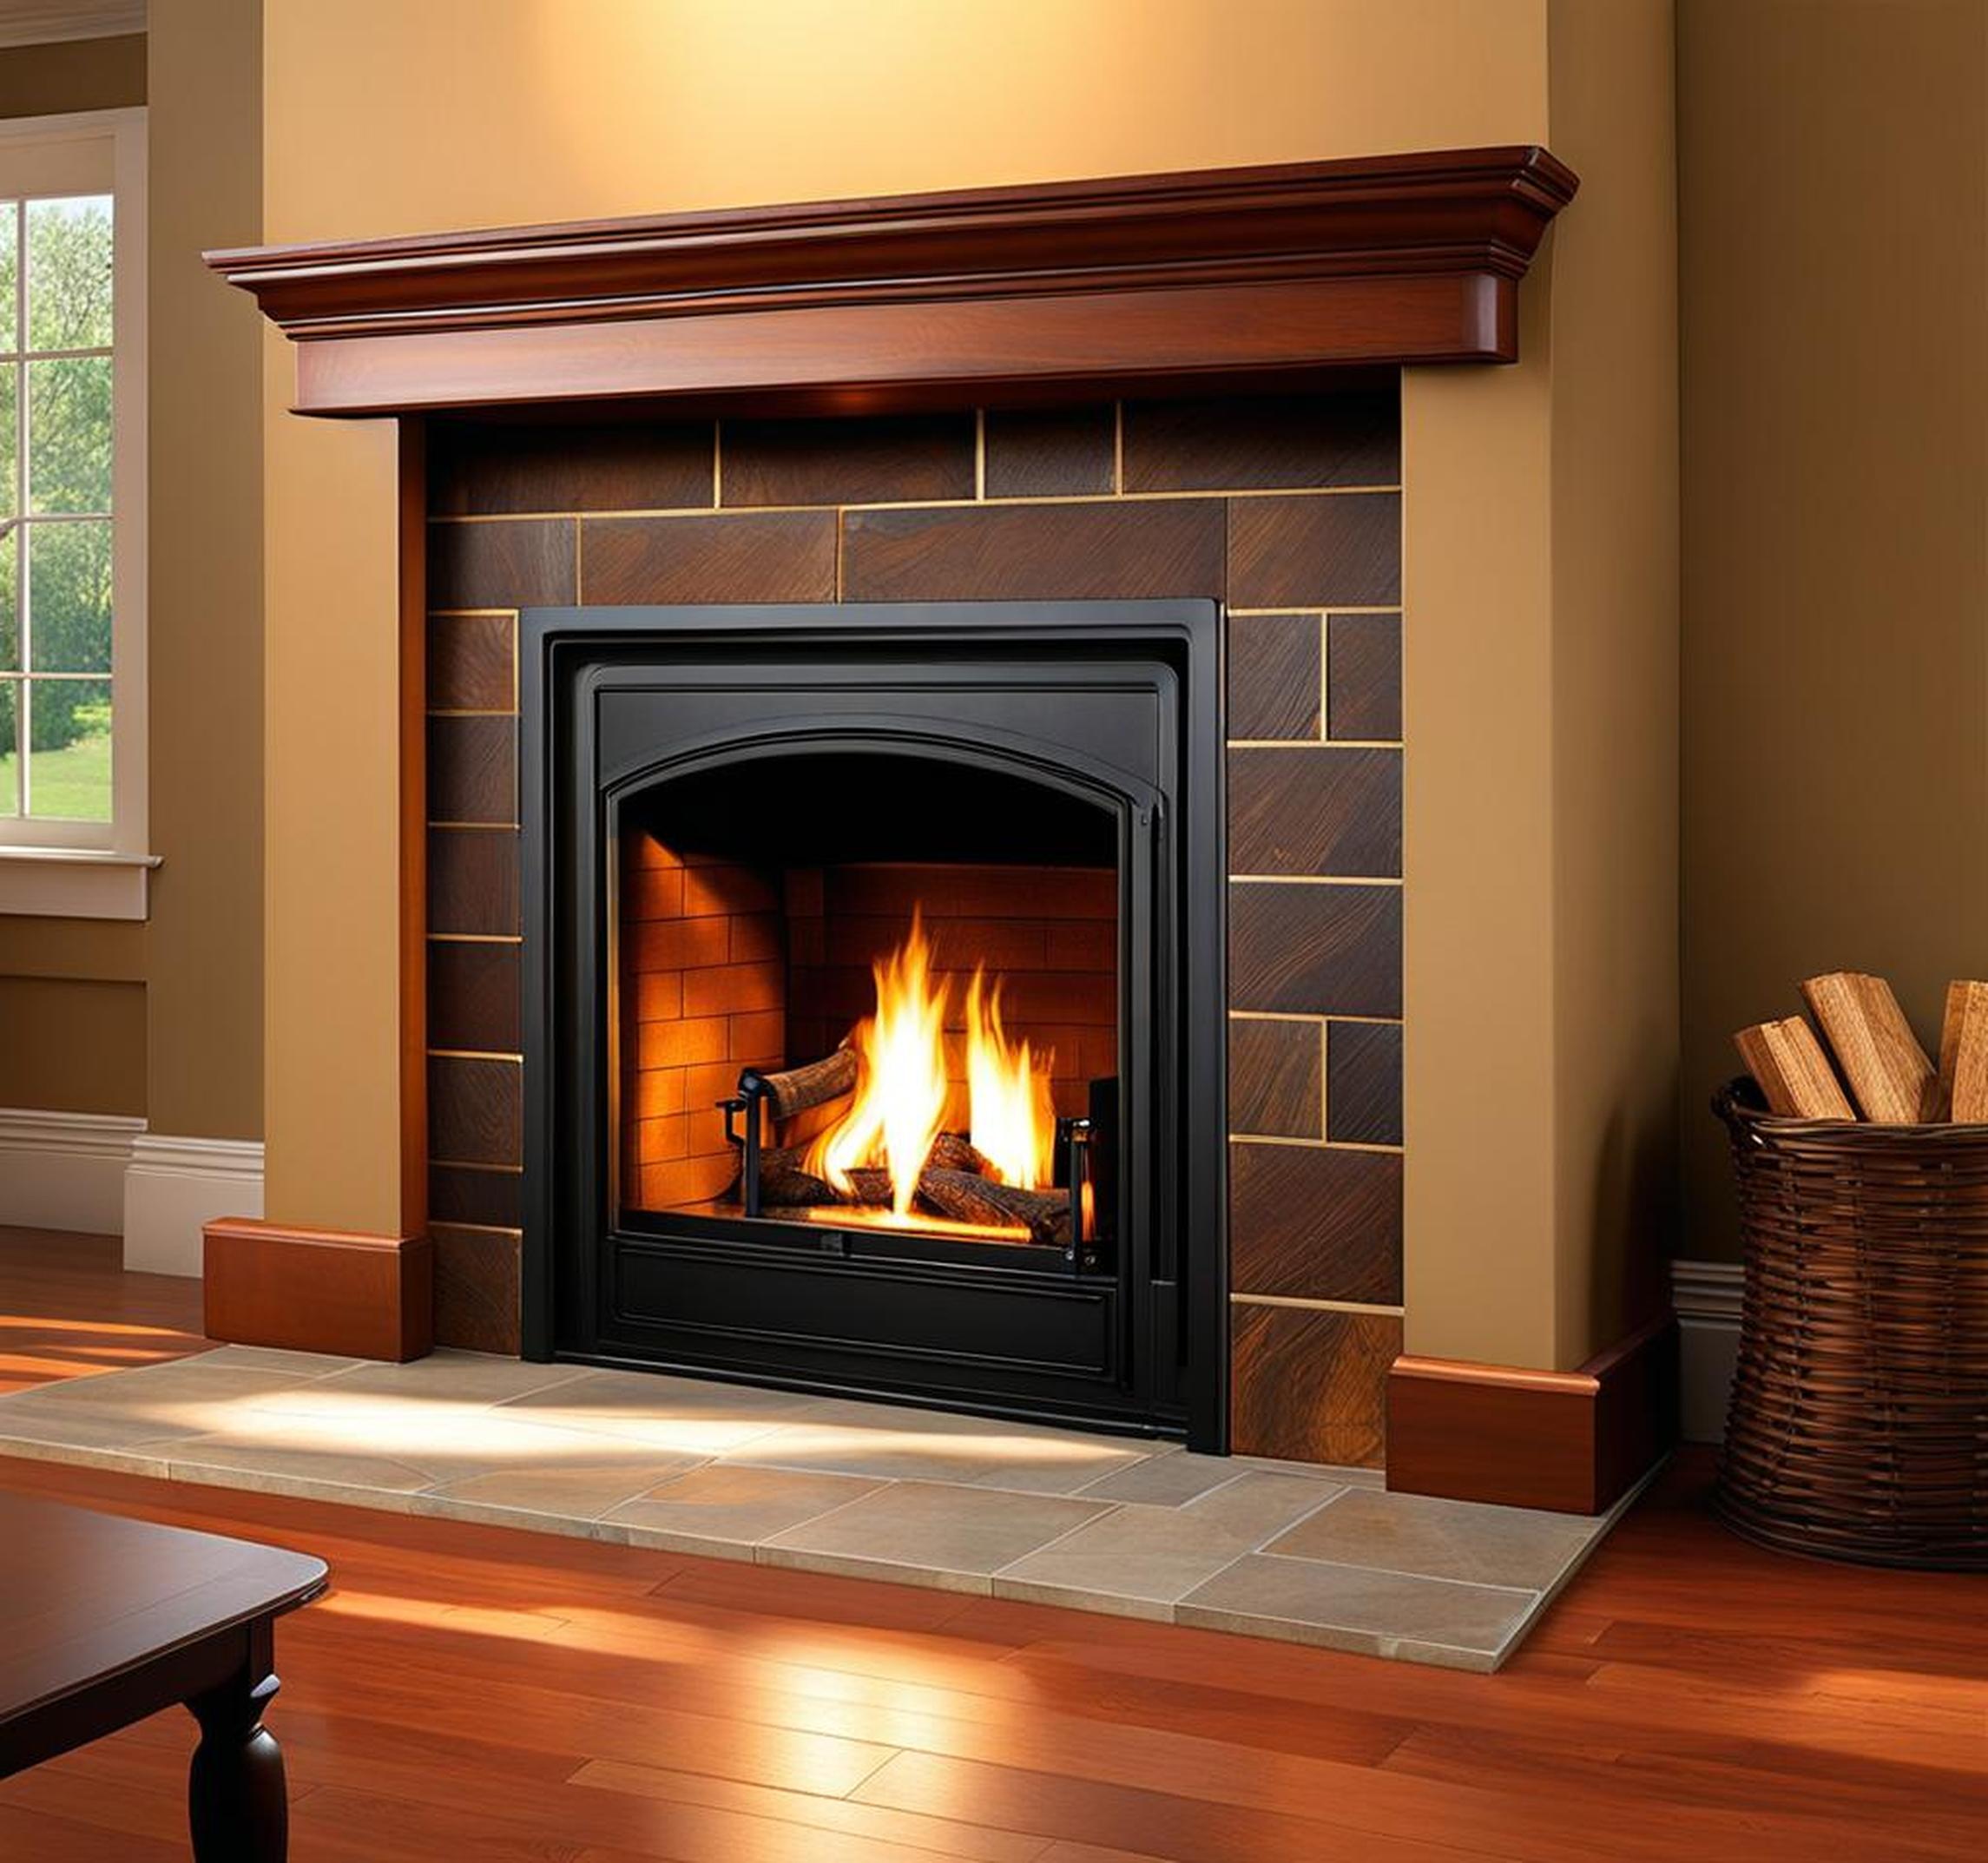 converting a fireplace to a wood stove